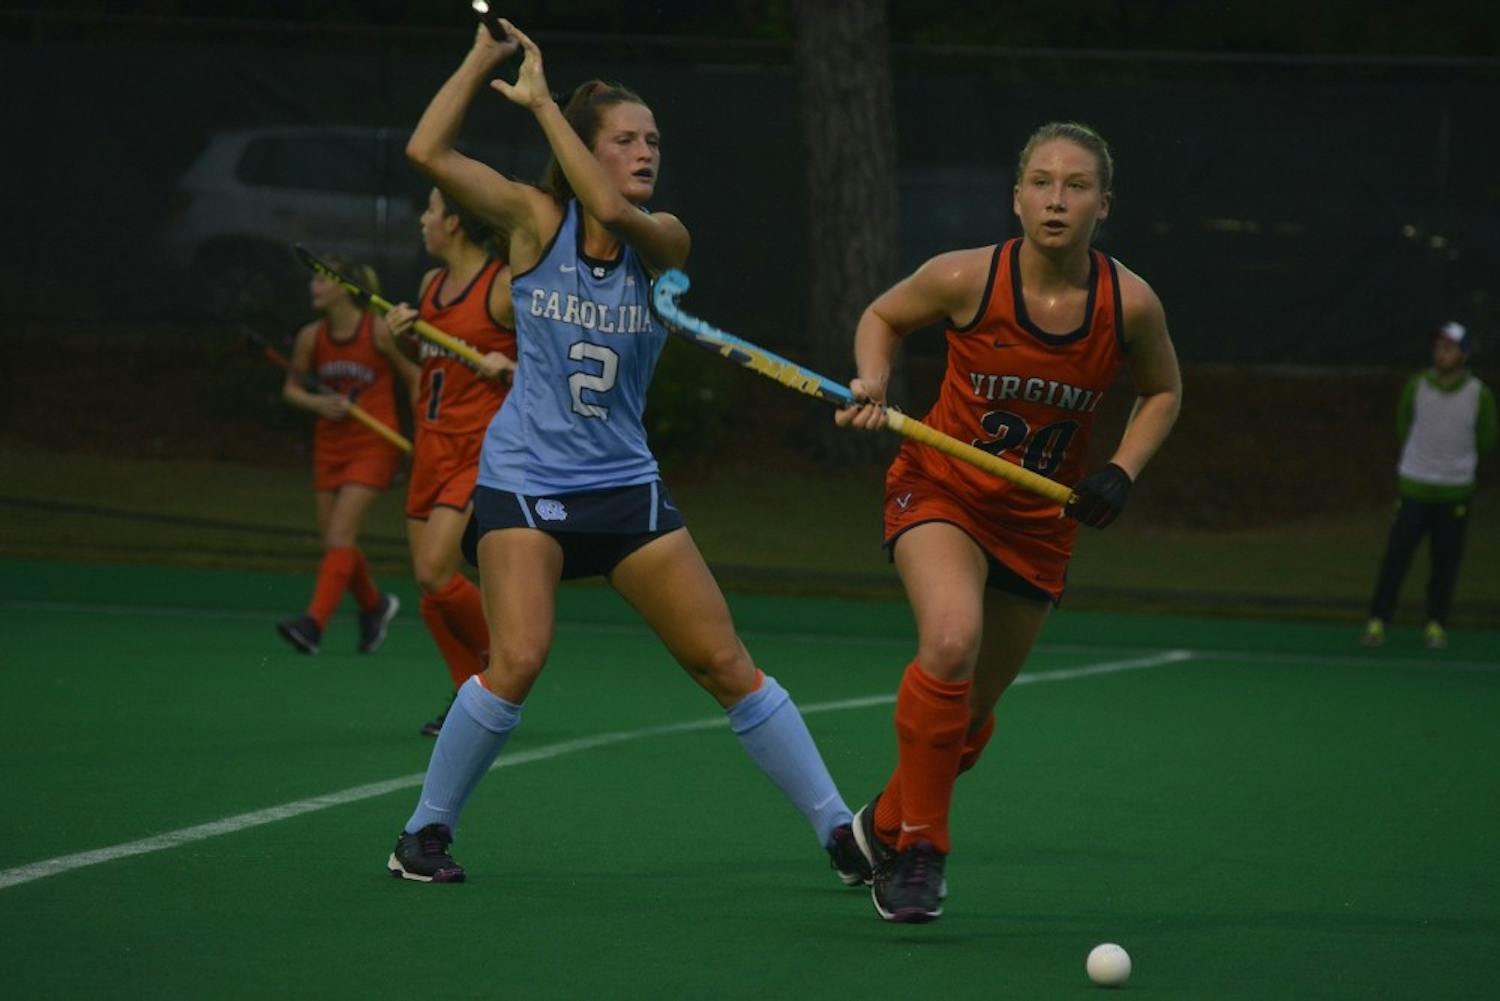 The UNC Women's Field Hockey team overcame Virginia in 3-2 overtime victory on Friday, October 7.